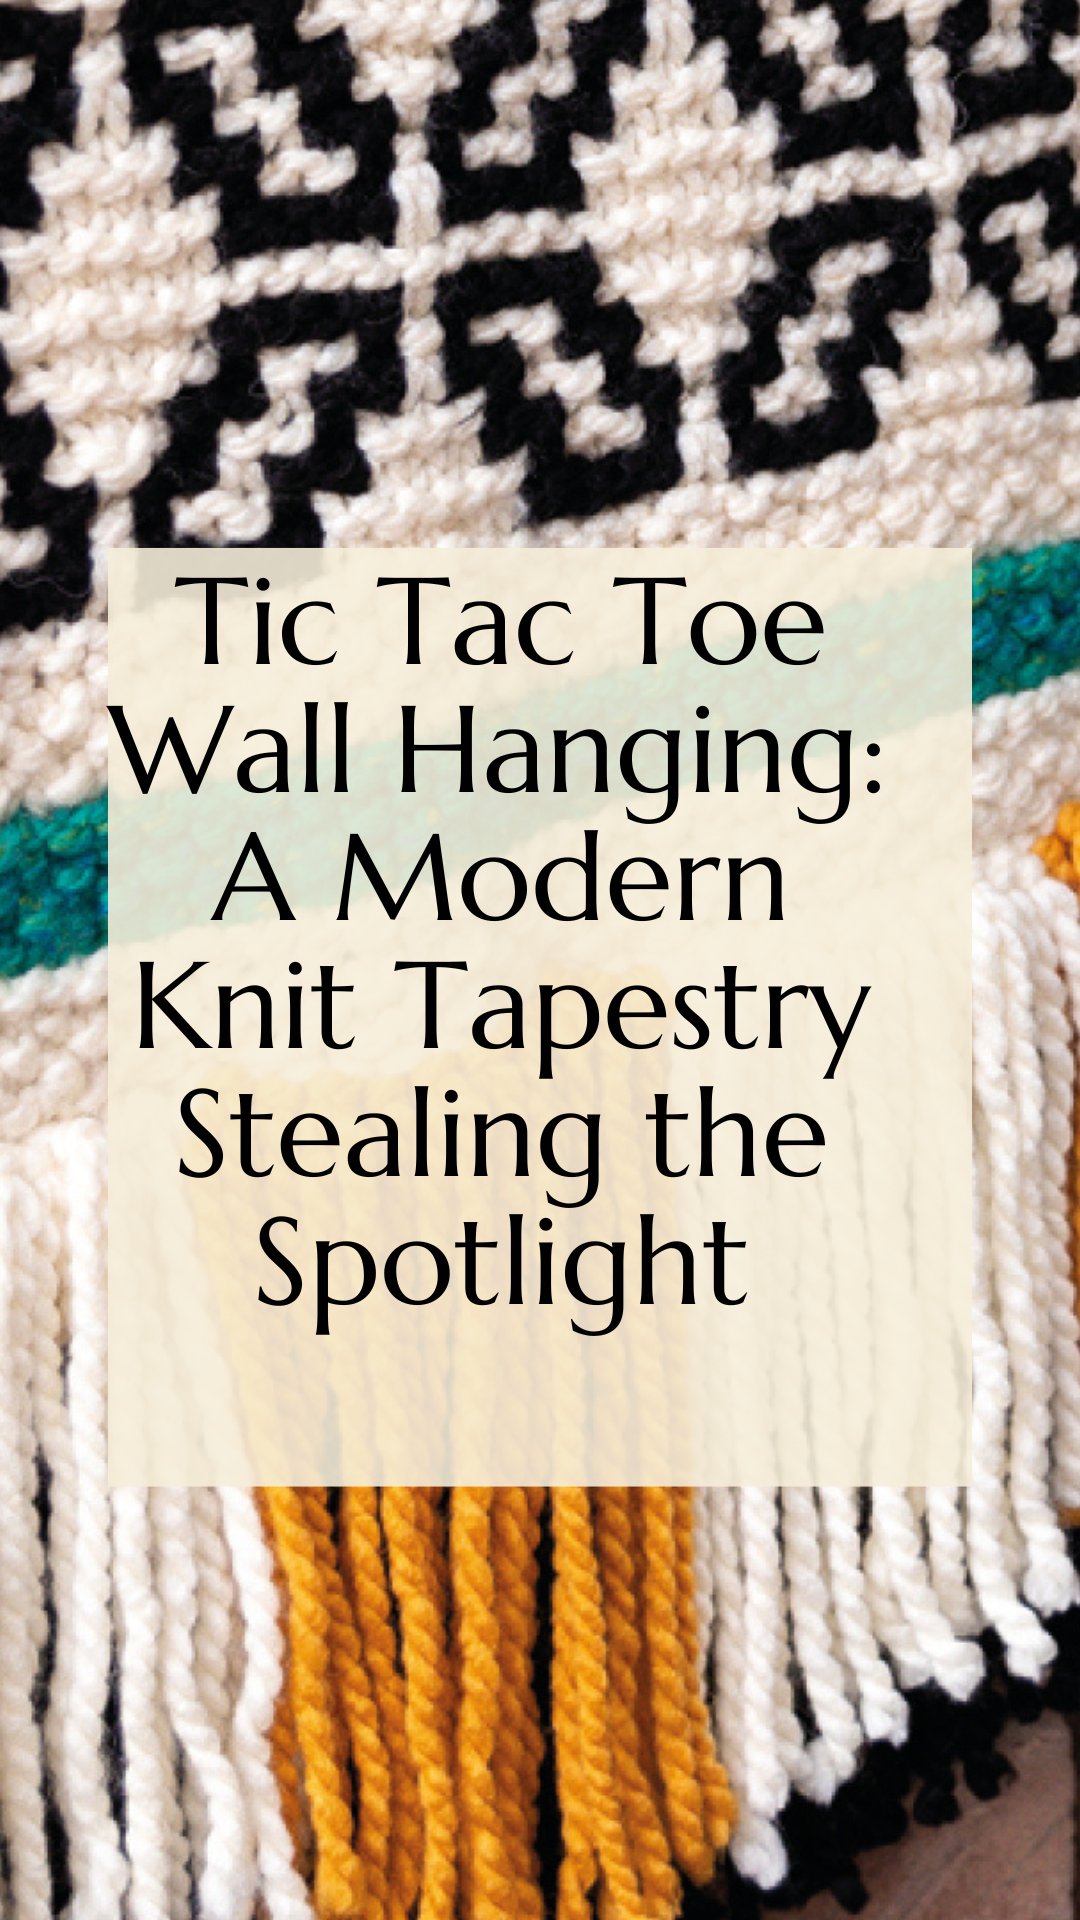 Tic Tac Toe Wall Hanging: A Modern Knit Tapestry Stealing the Spotlight